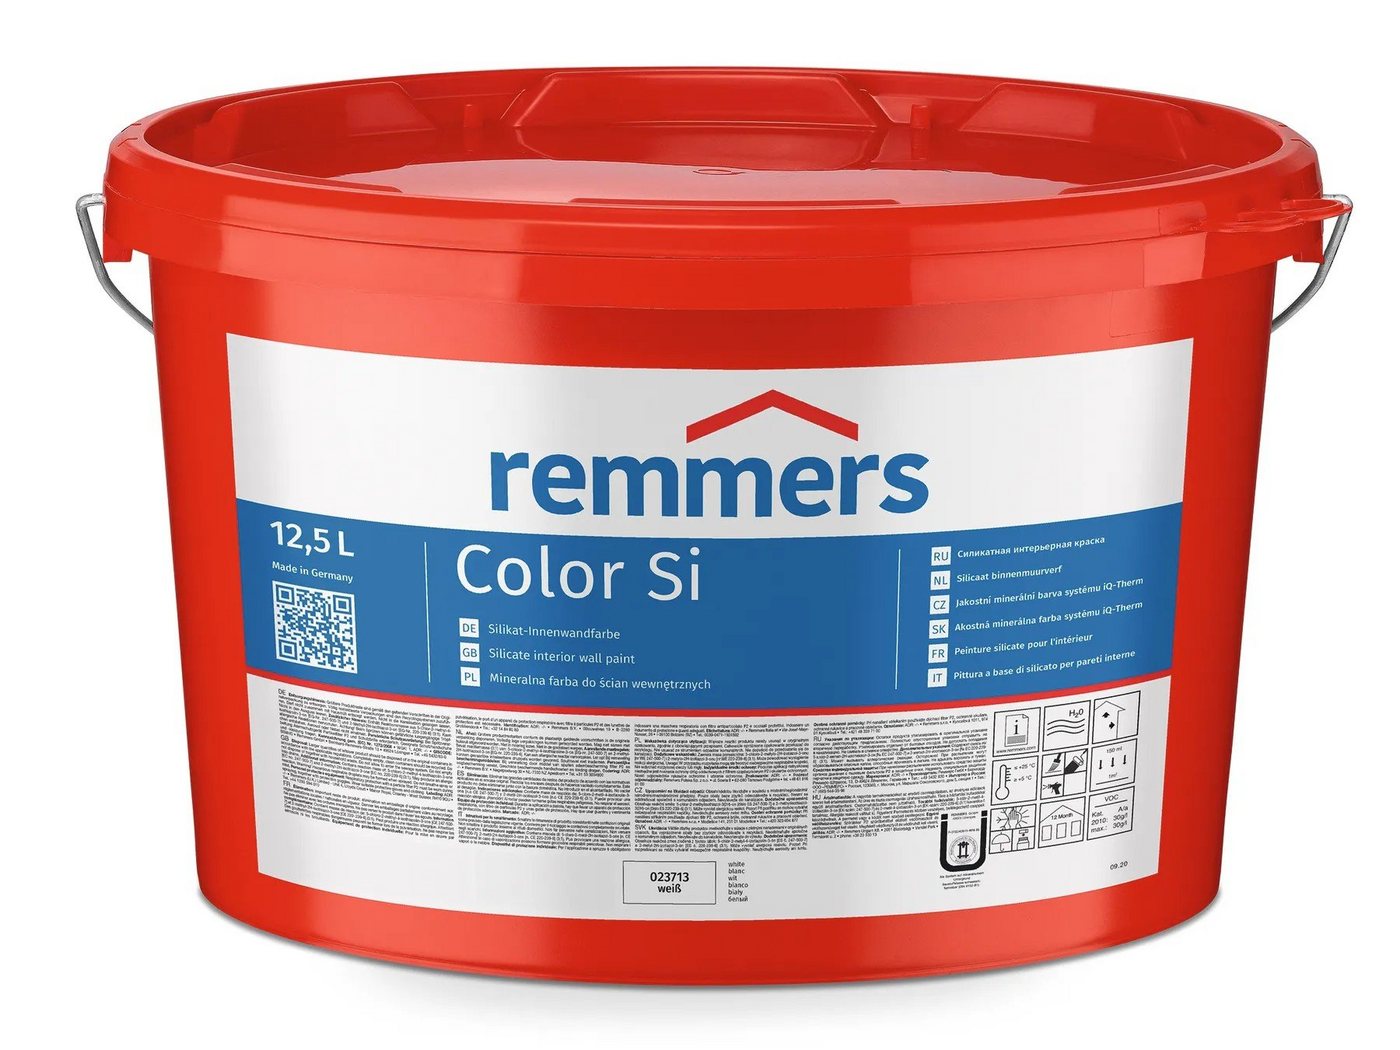 Remmers Wandfarbe Color SL von Remmers